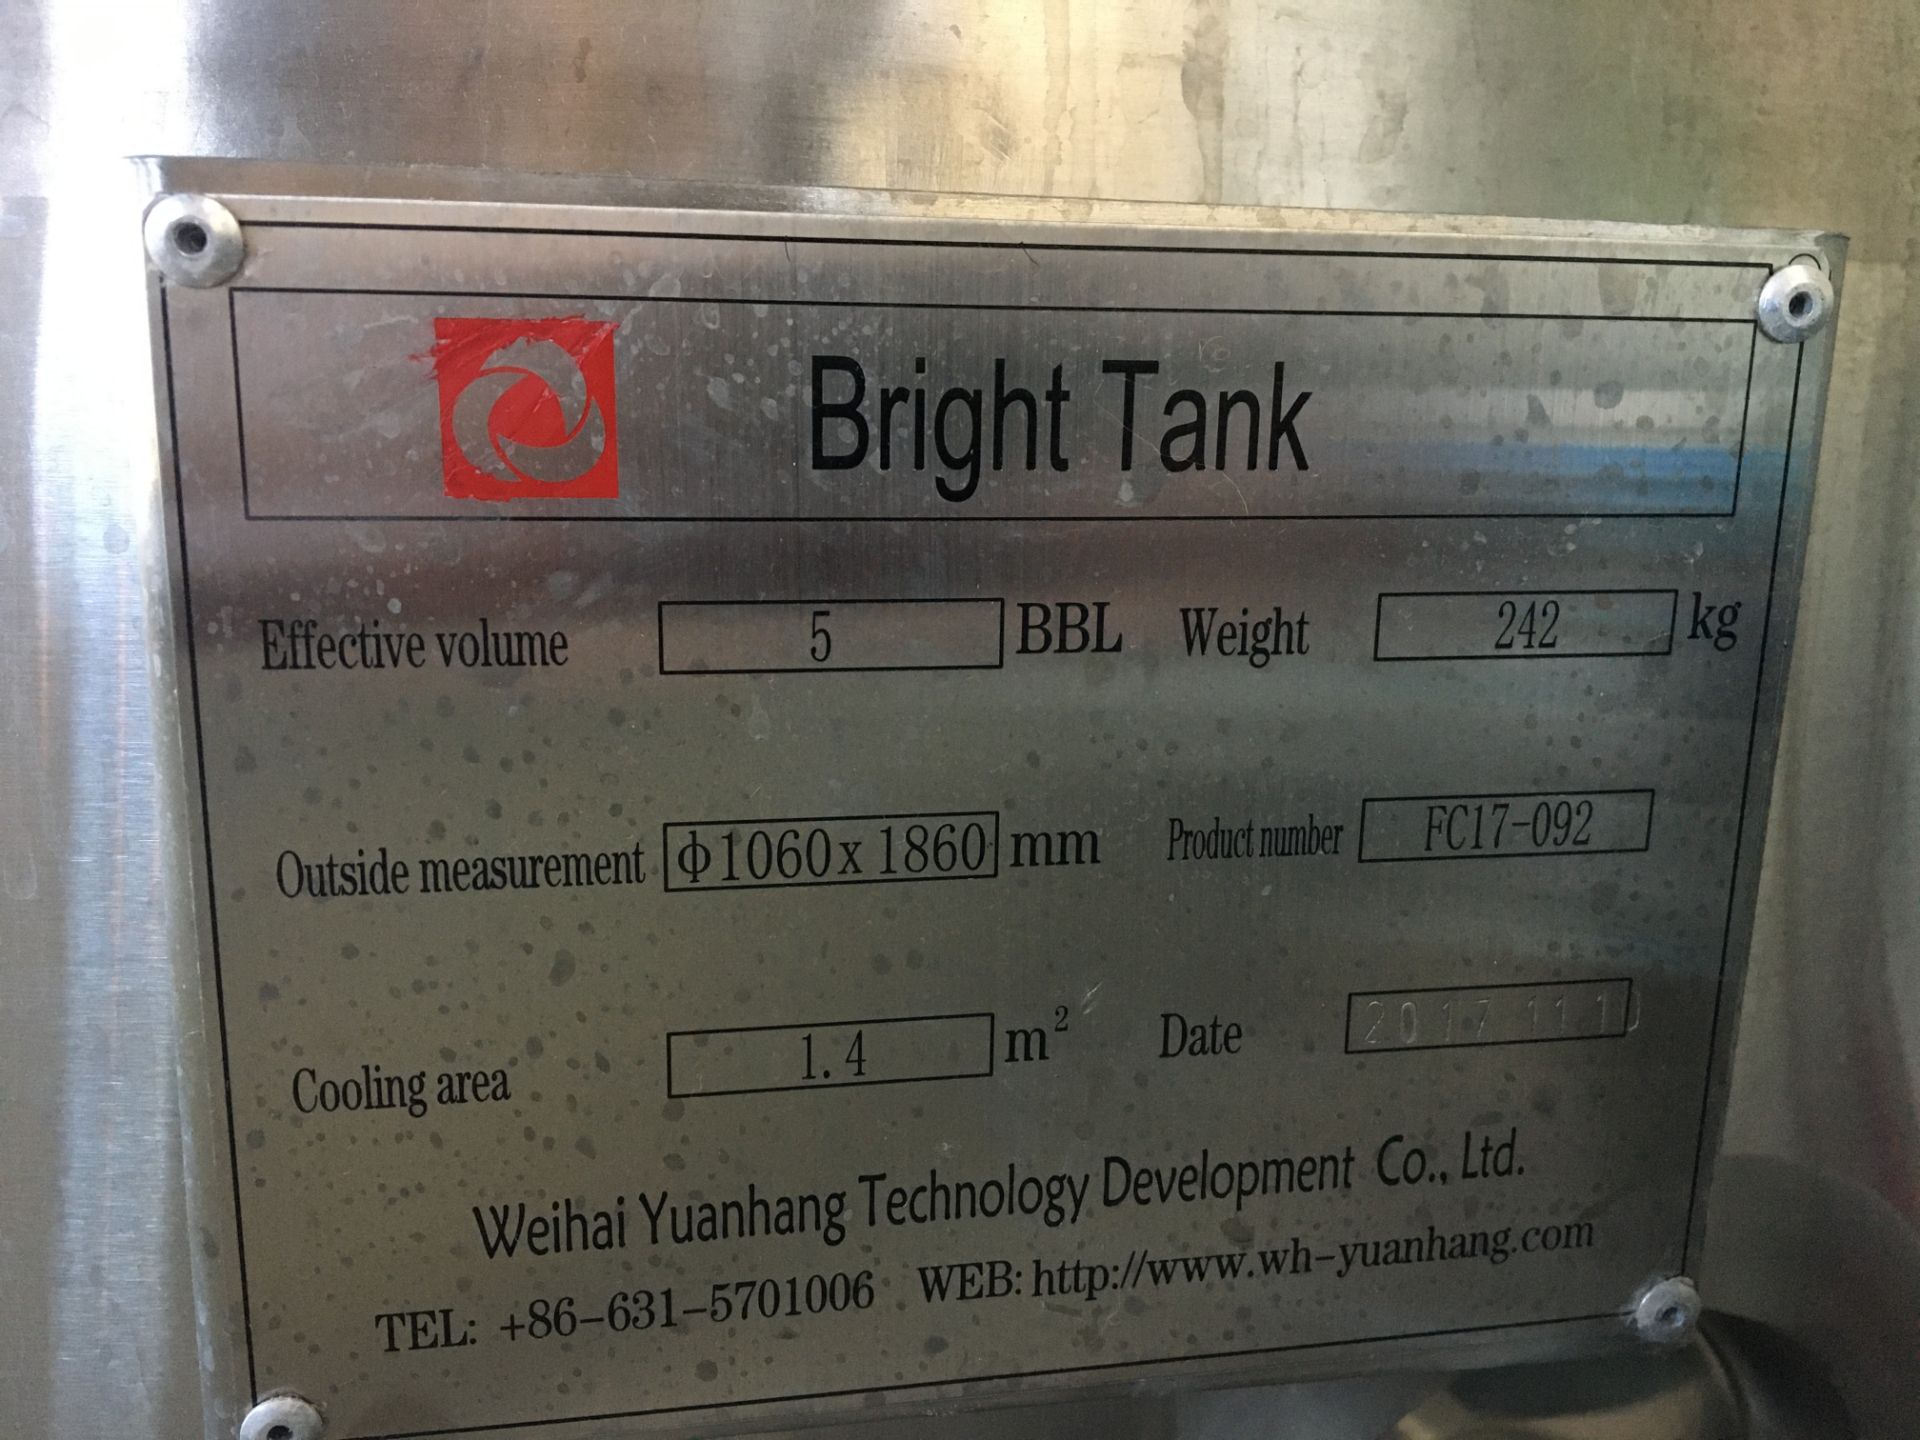 5-BBL Minnetonka Bright Tank, Stainless Steel; storage for finished beer - Image 6 of 8